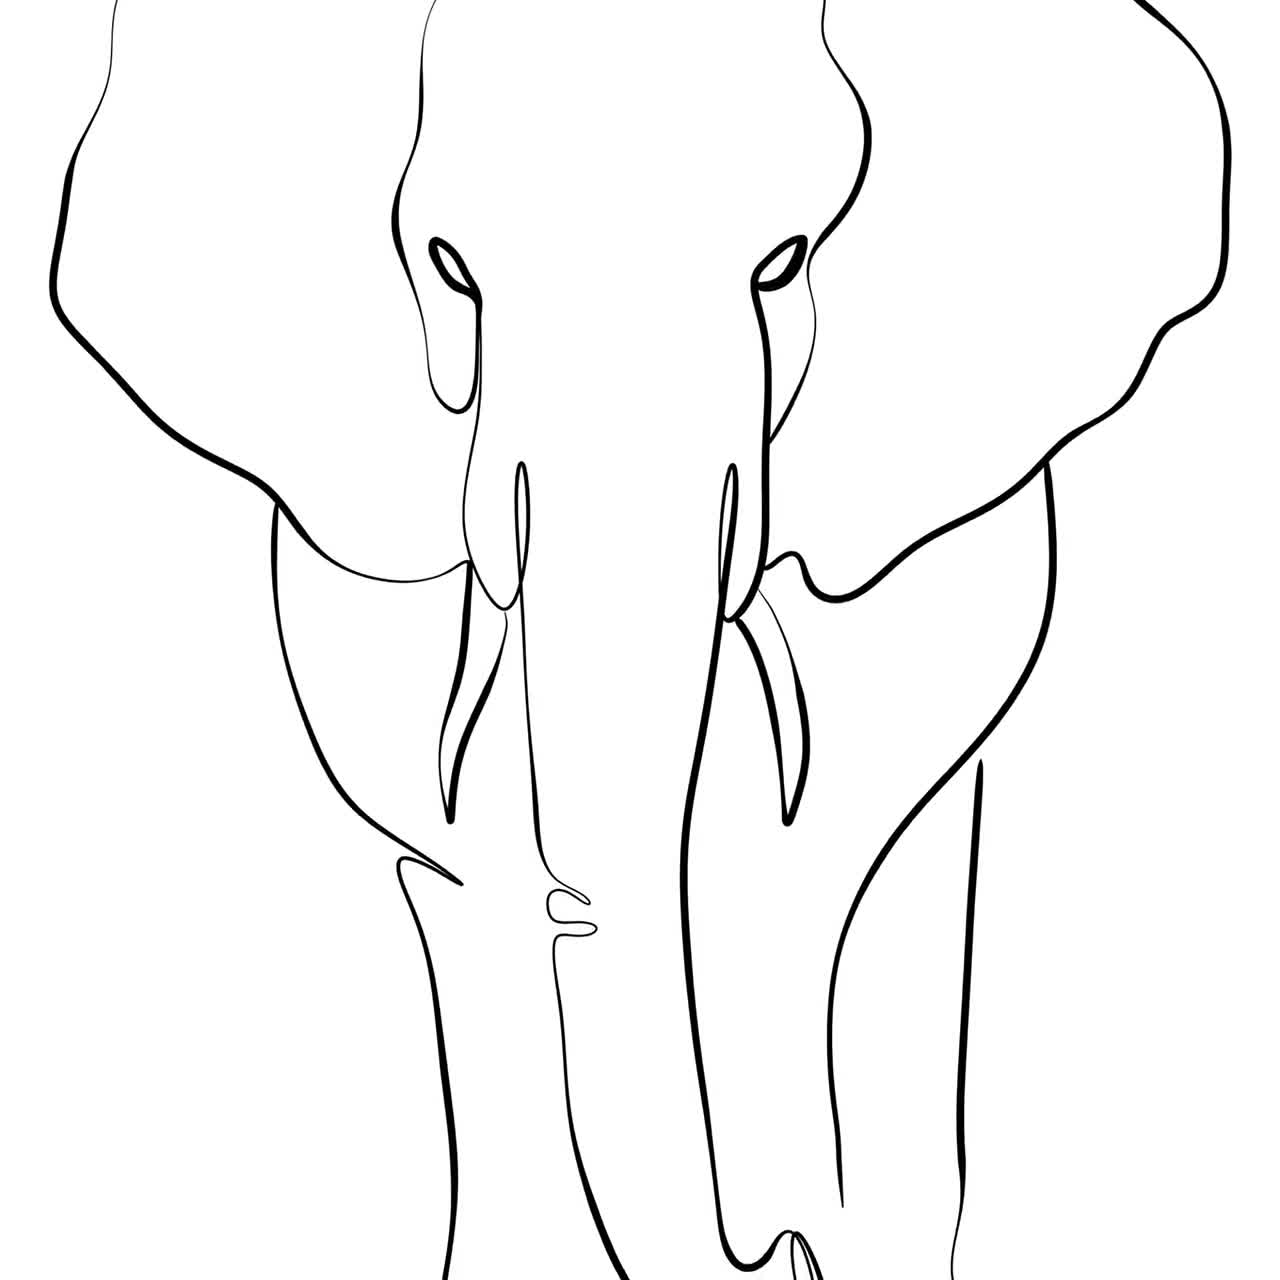 Elephant drawing easy drawing for kids - YouTube